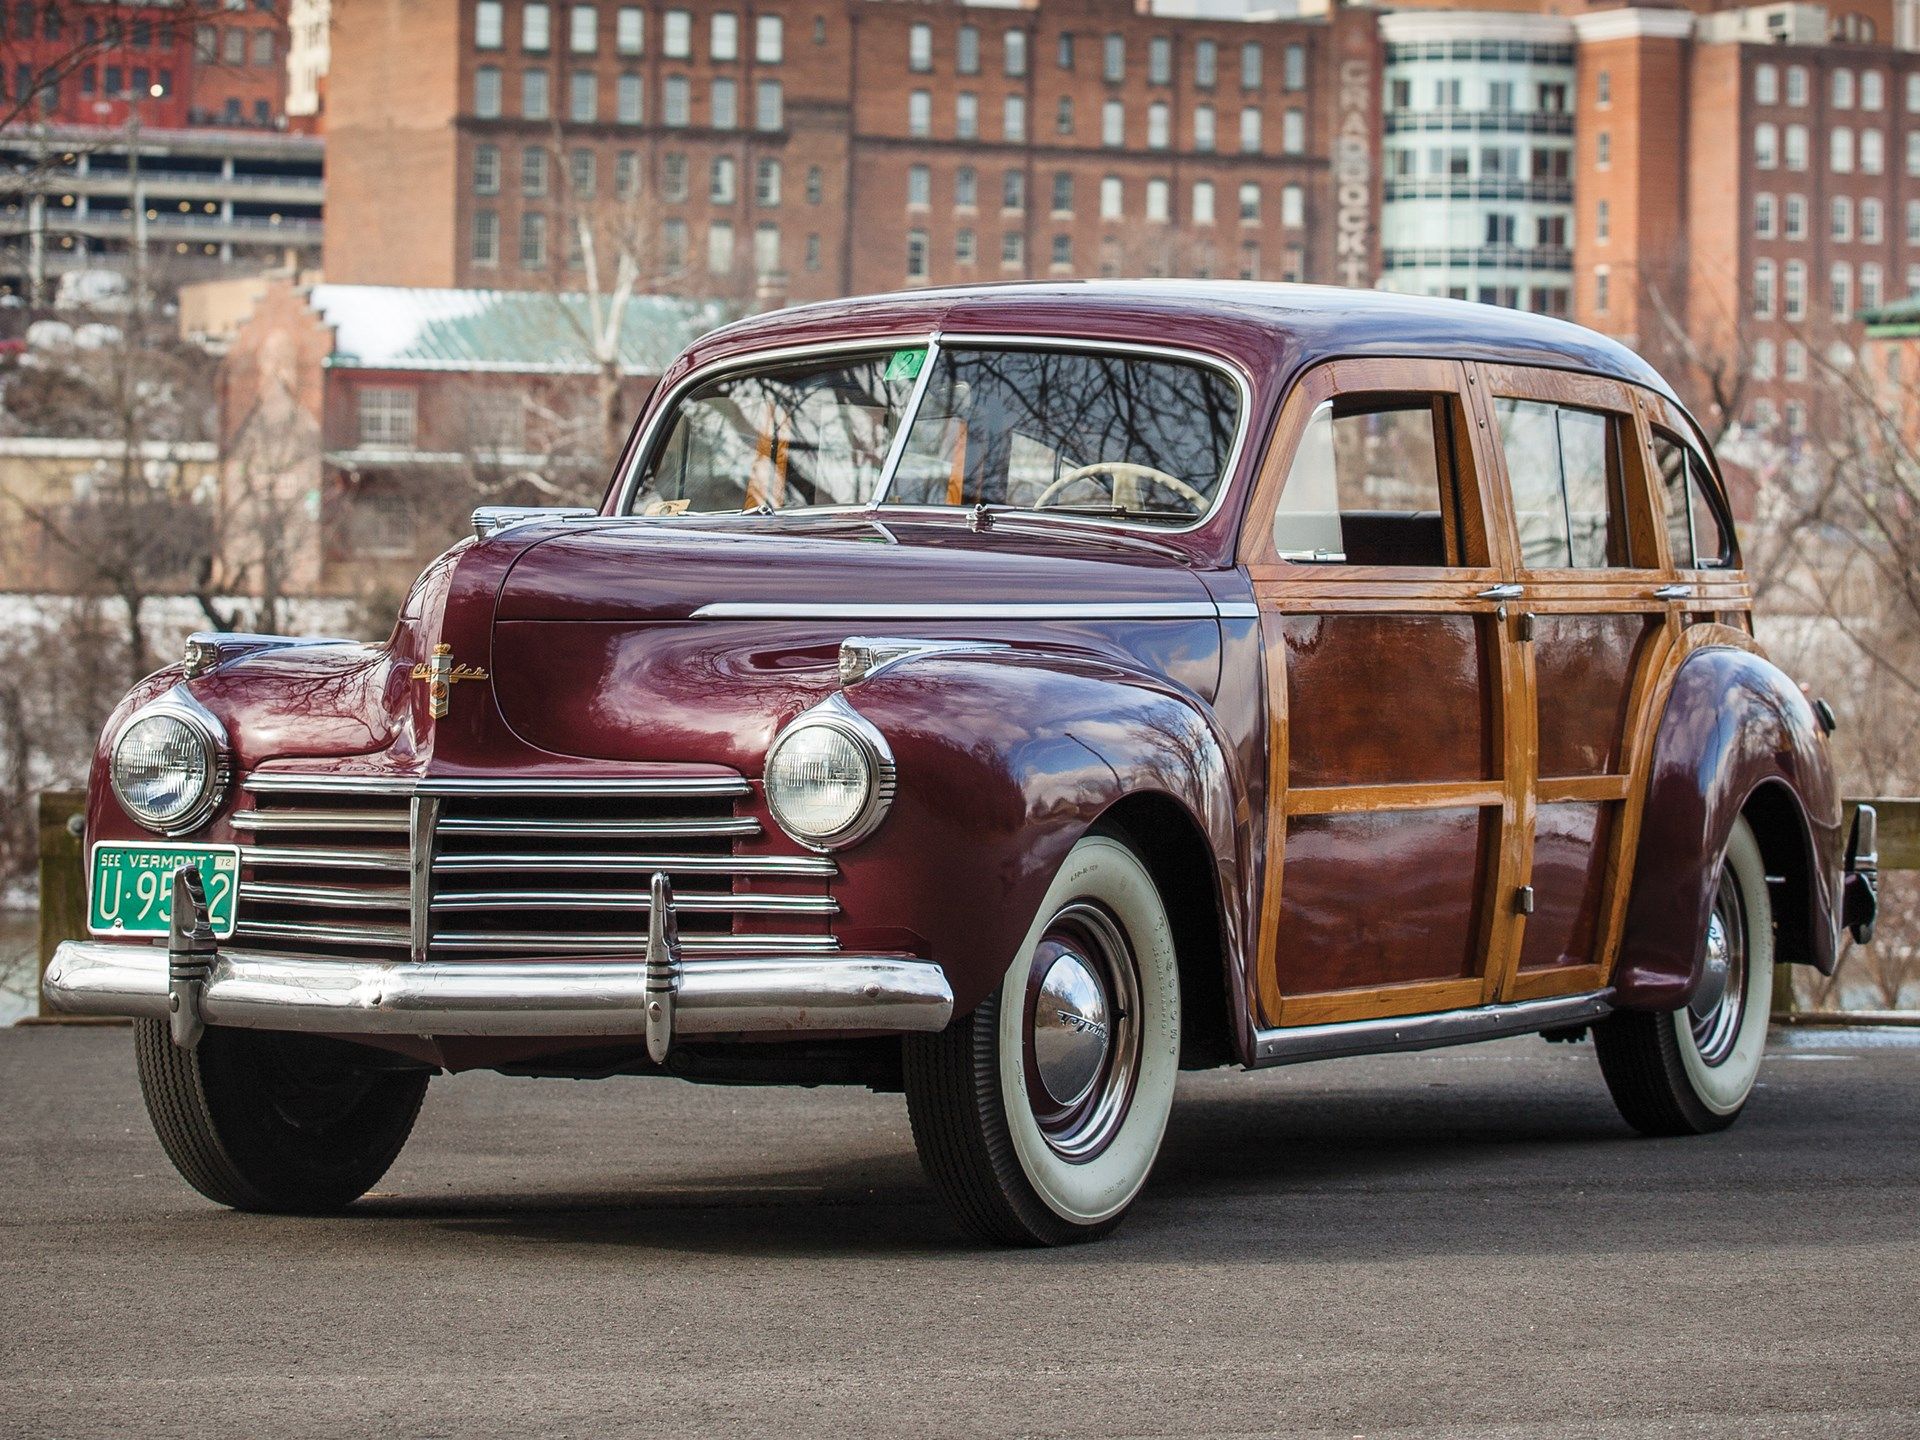 1941 Chrysler Town & Country